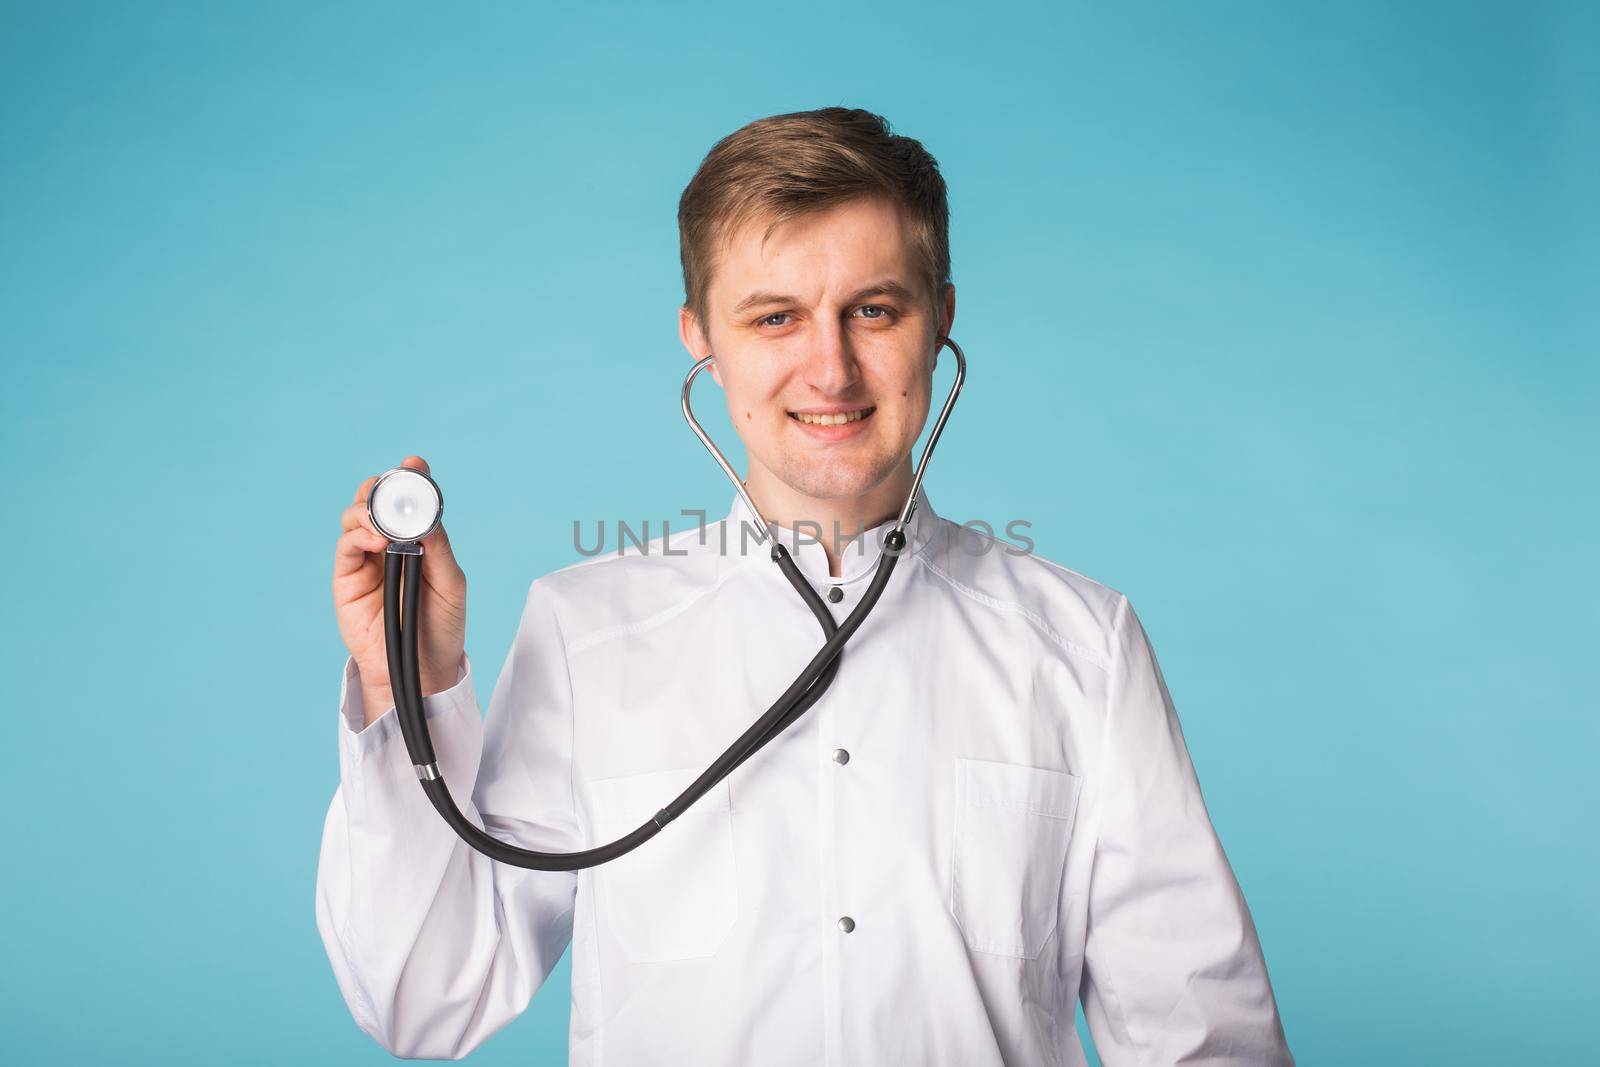 Doctor with stethoscope over blue background with copy space.